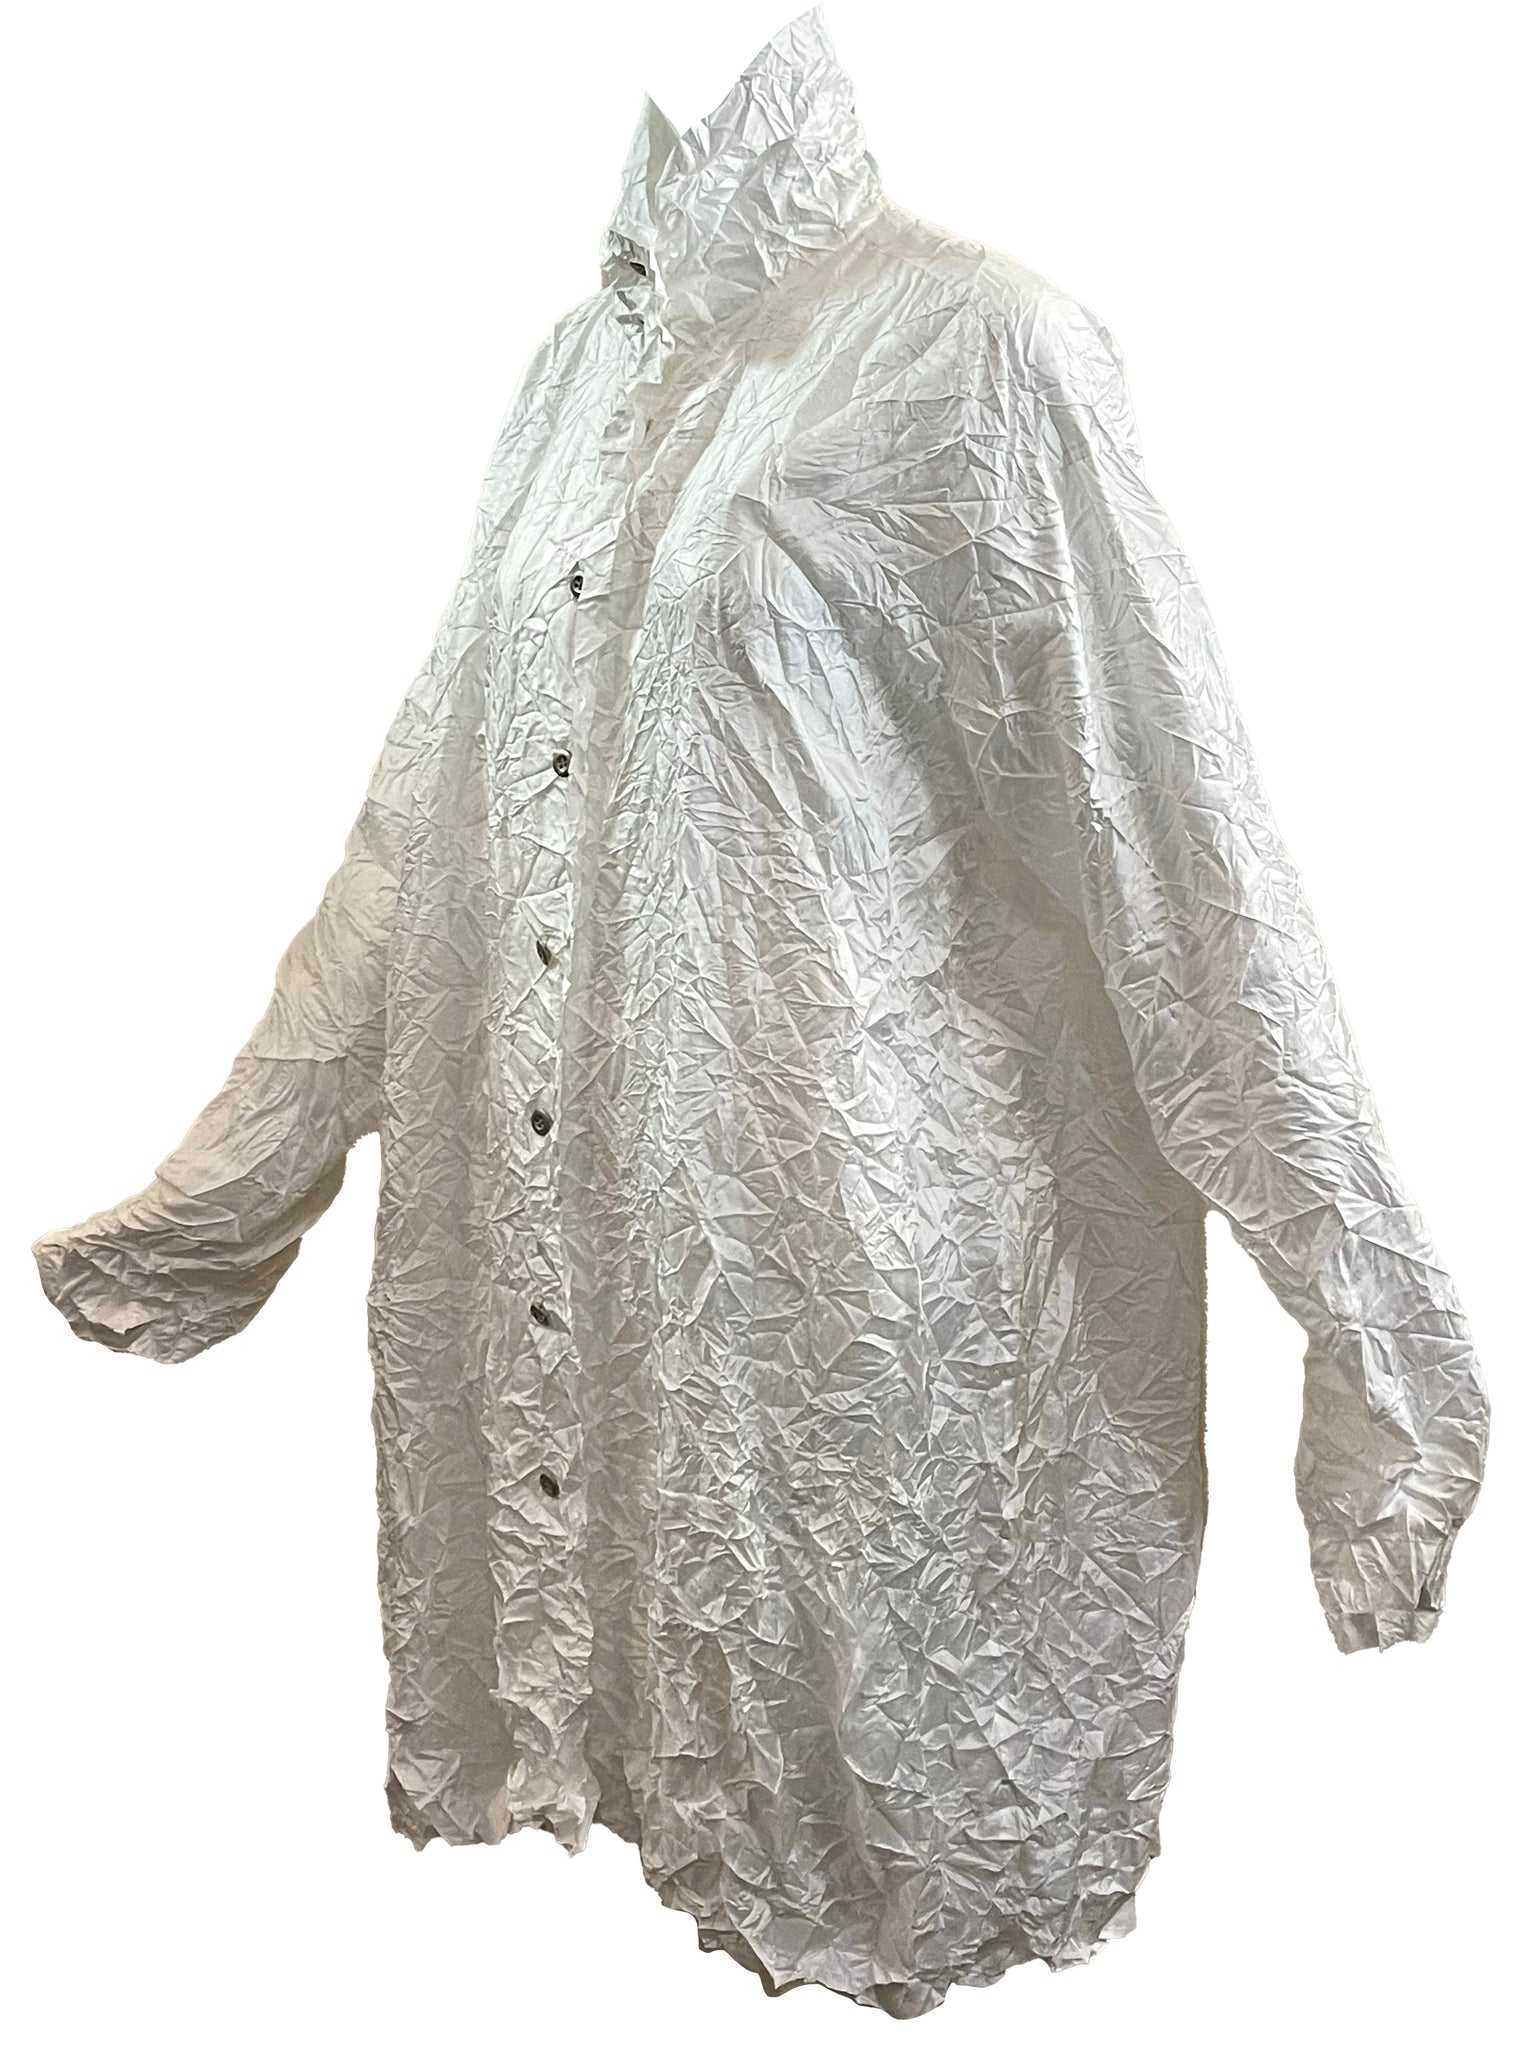  Issey Miyake Oversized White Button Down Shirt-Dress SIDE 2 of 5